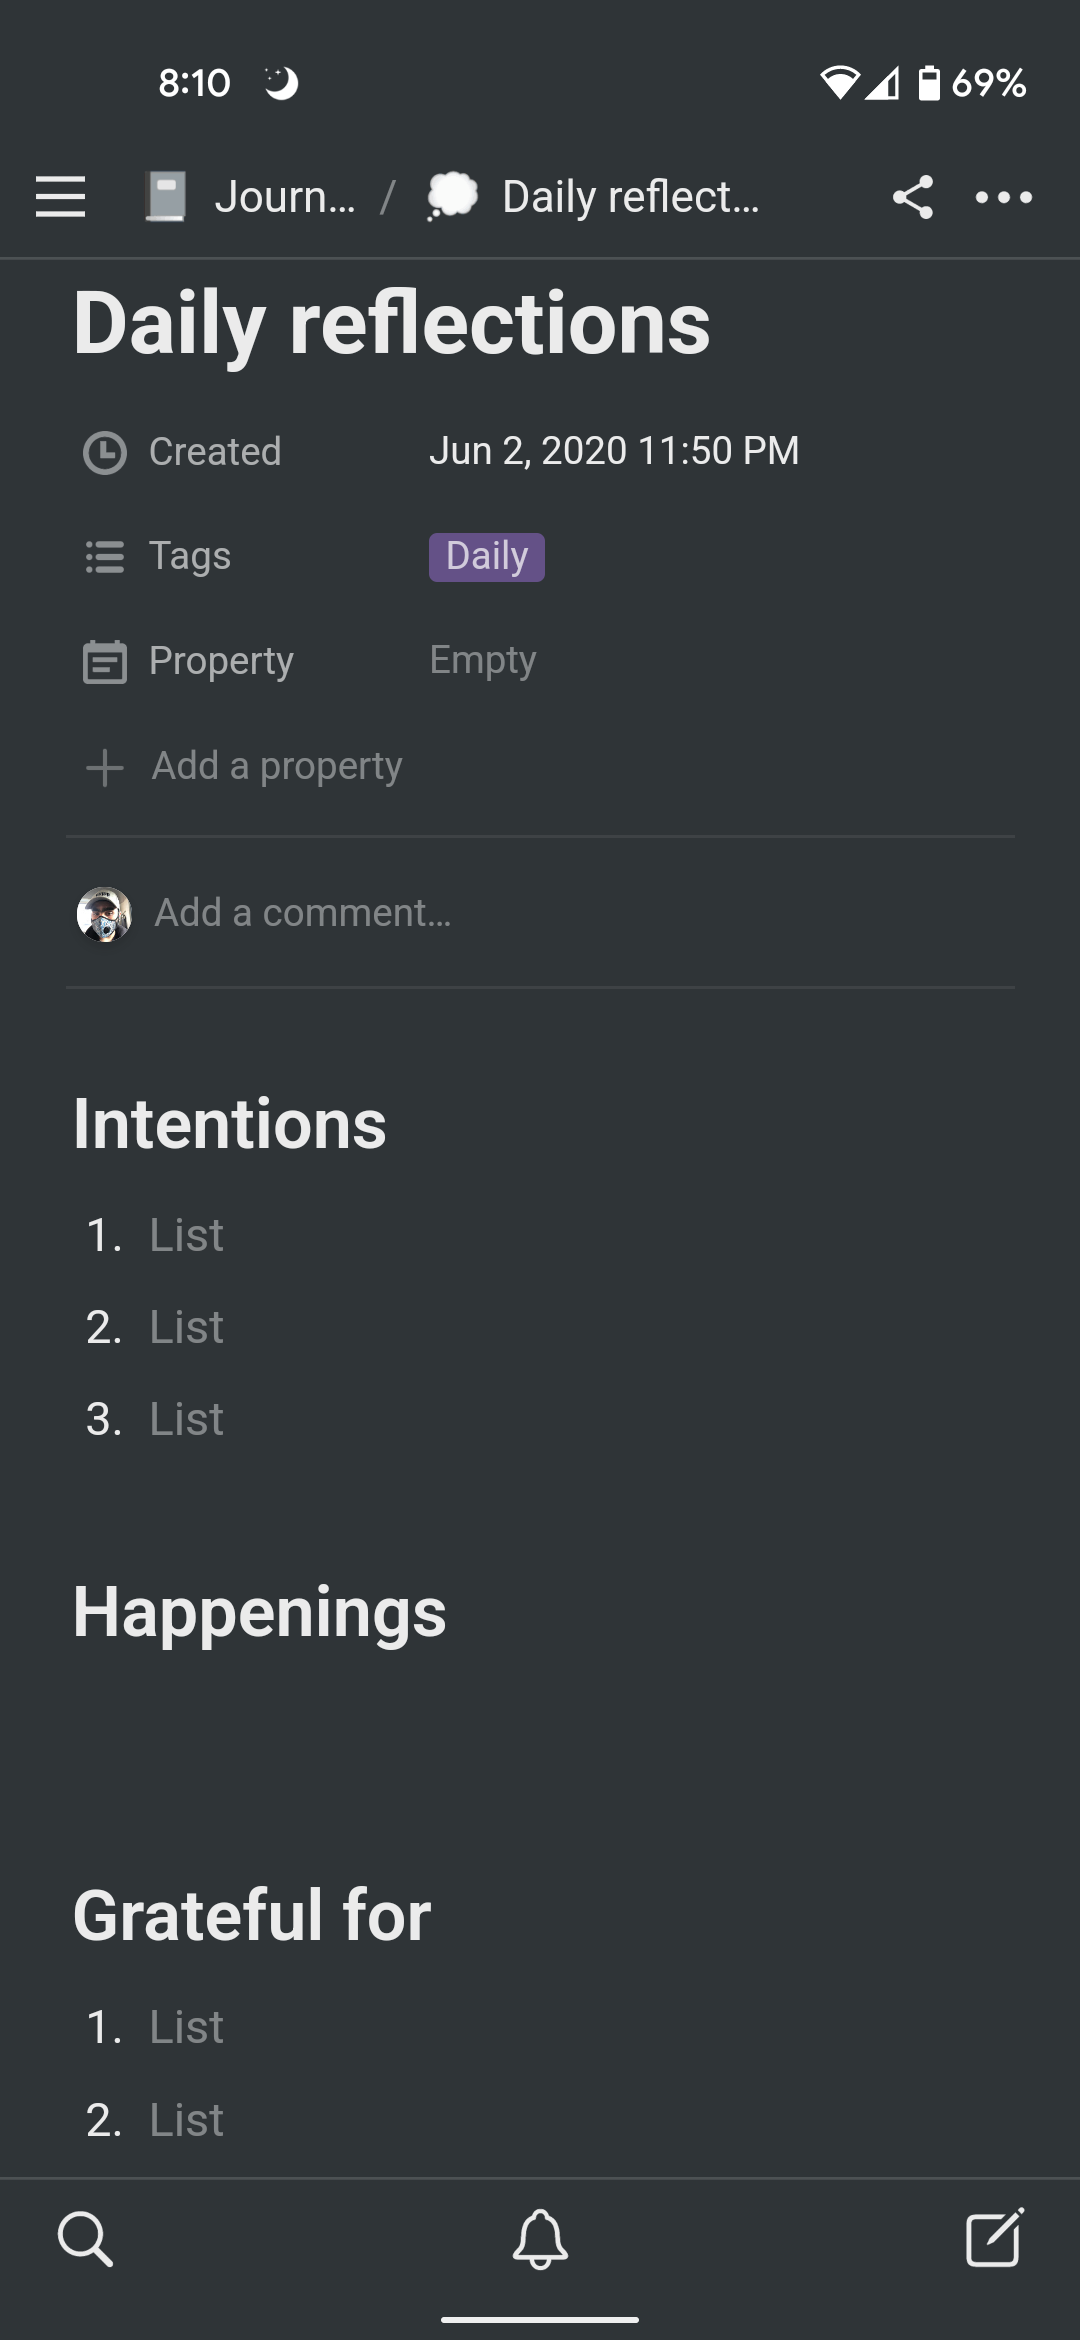 Journal template in the Notion app